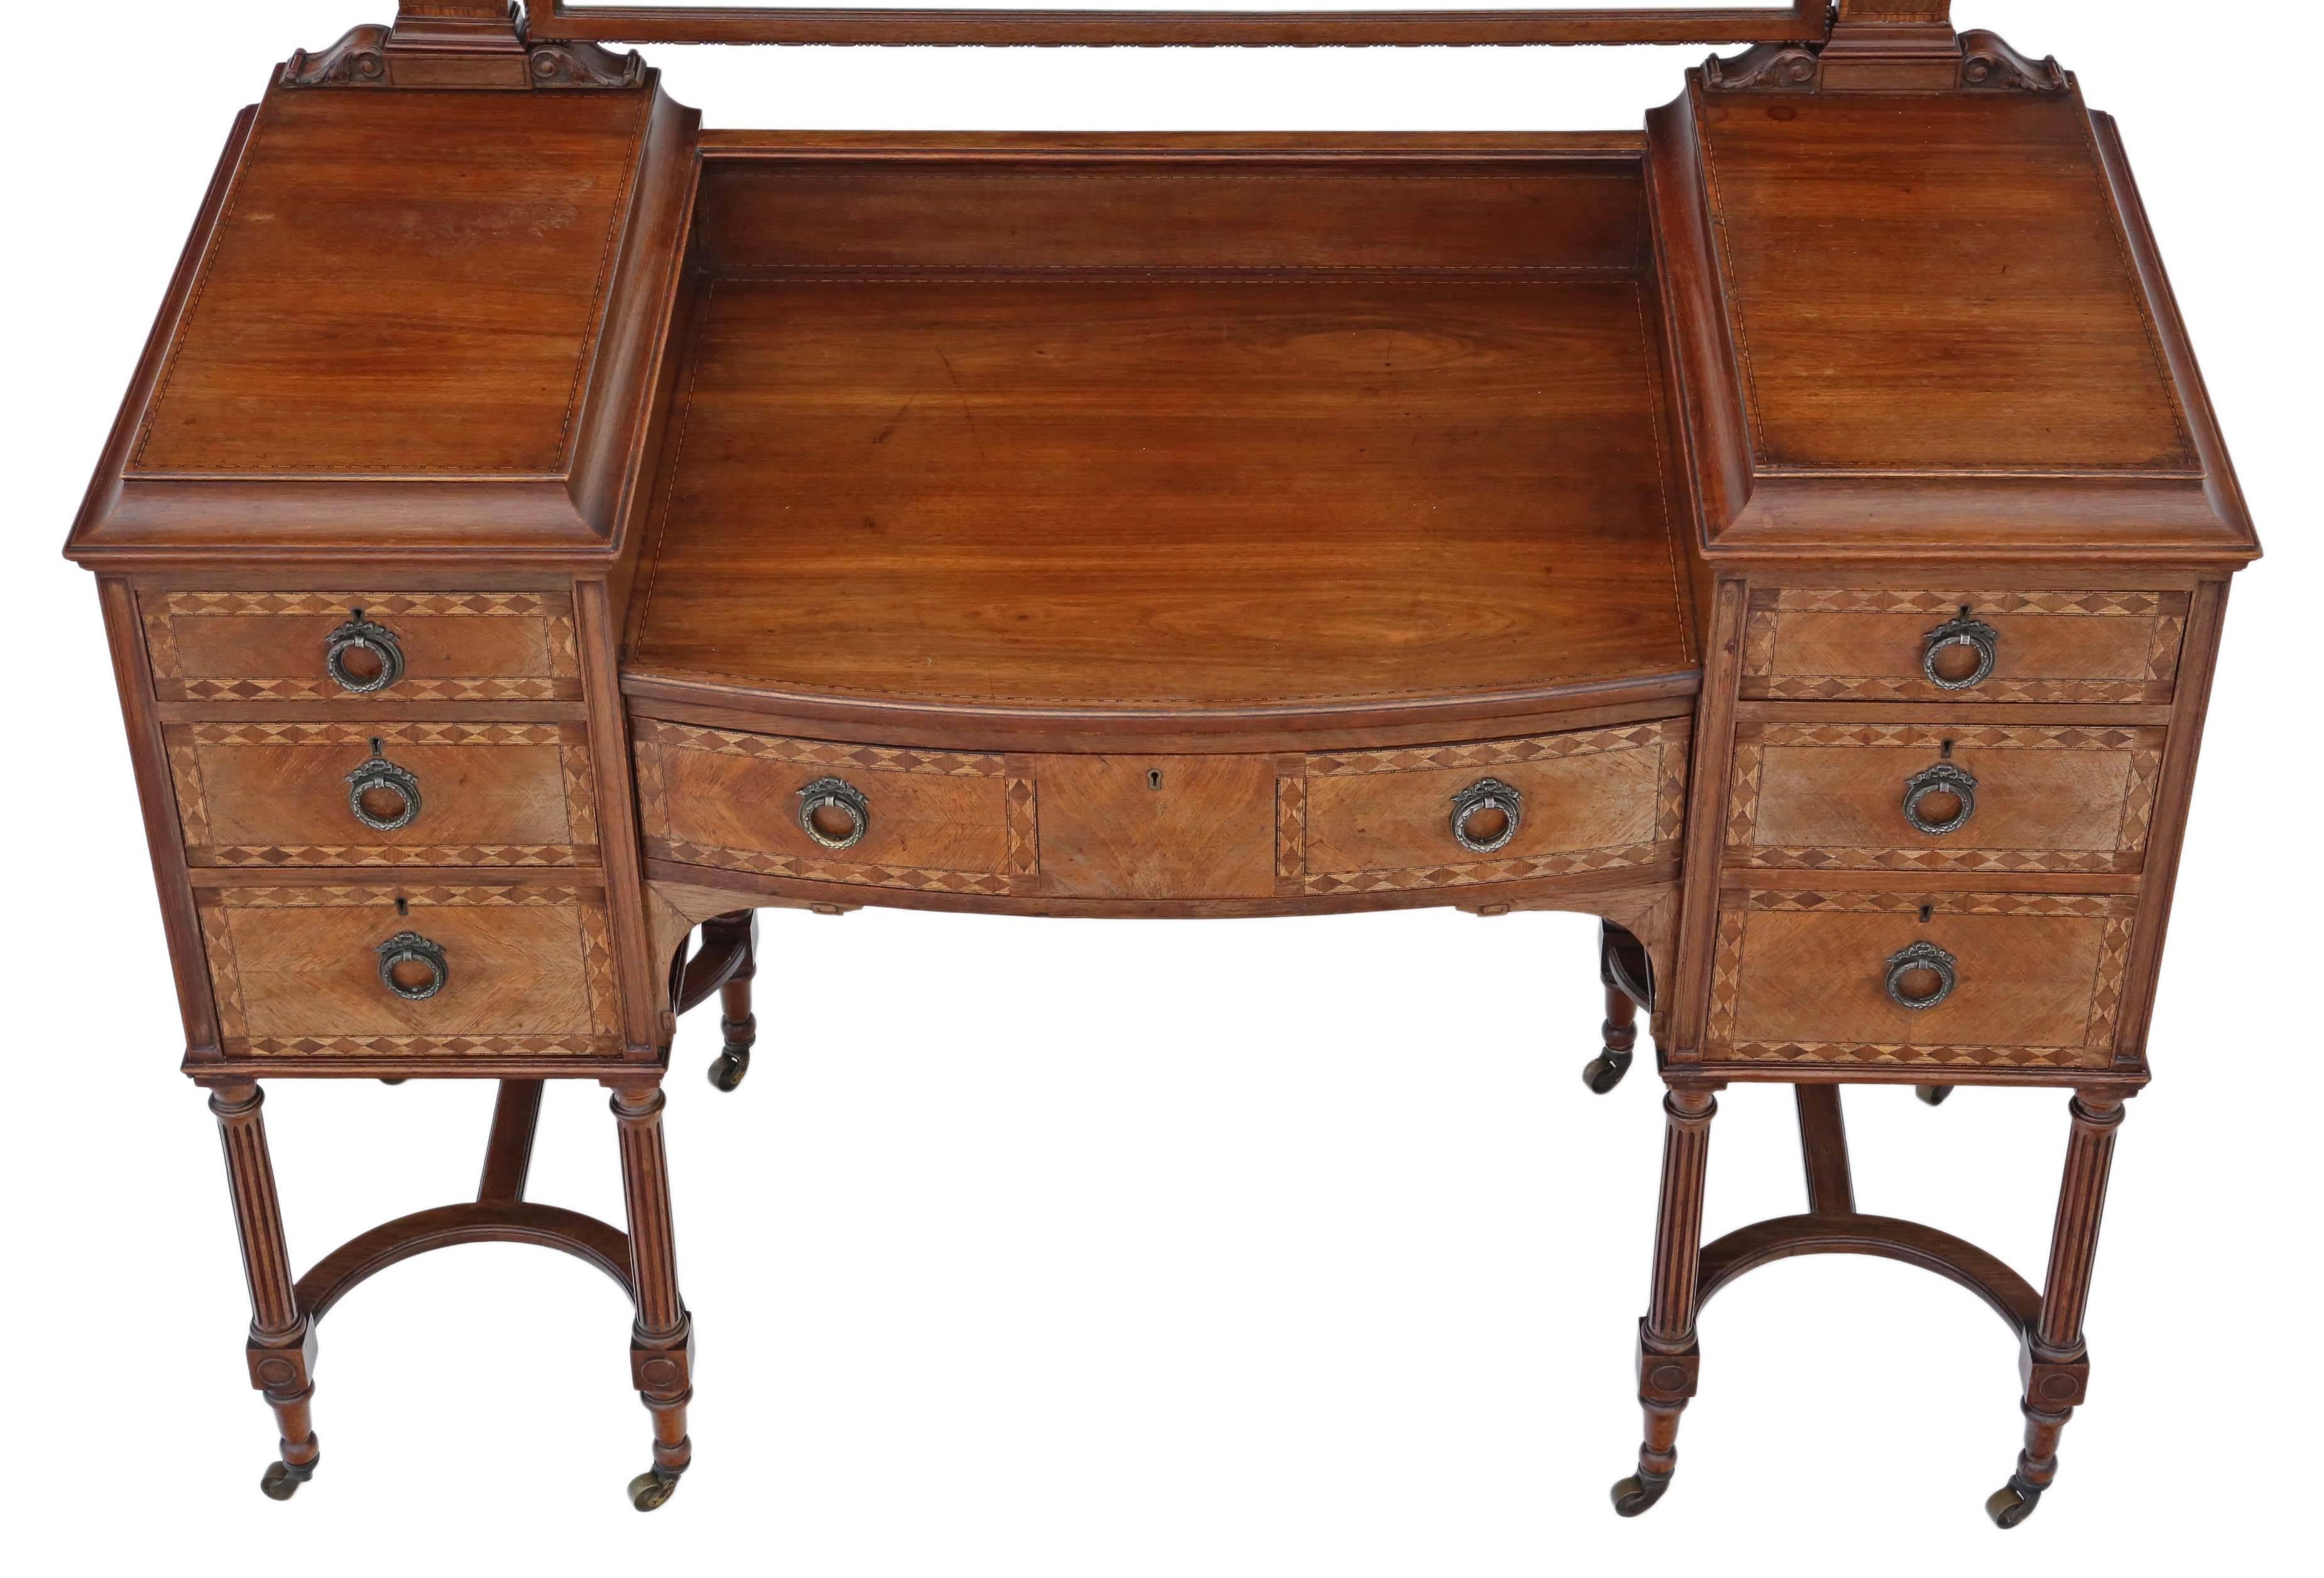 British Antique Quality Edwardian circa 1900-1910 Inlaid Rosewood Dressing Table For Sale